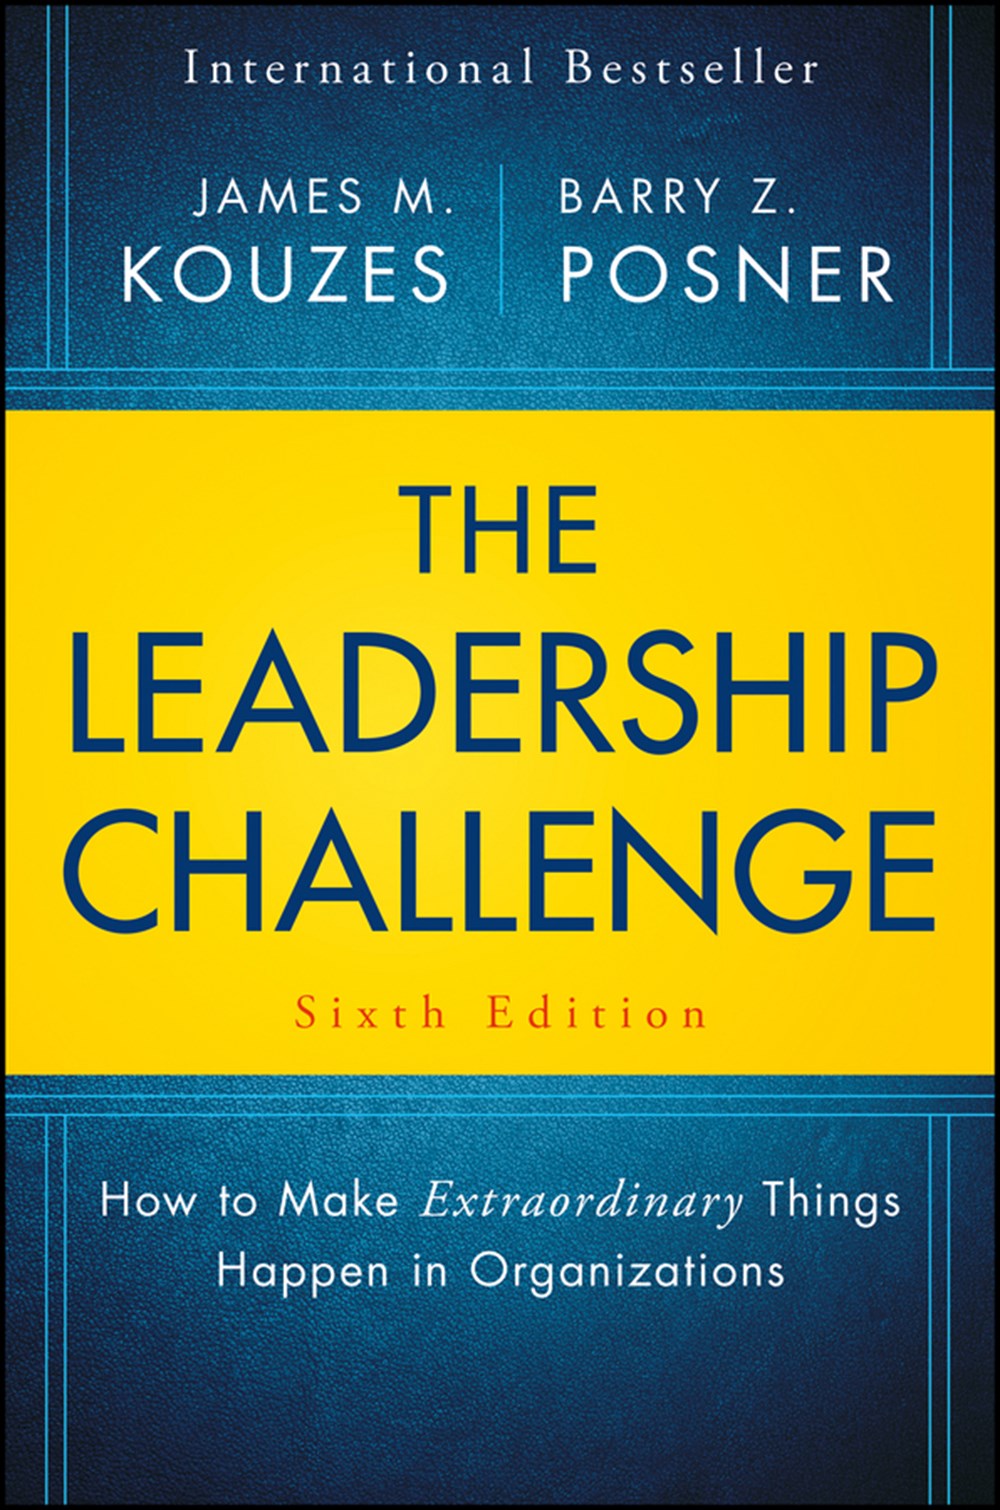 Leadership Challenge: How to Make Extraordinary Things Happen in Organizations (Revised)